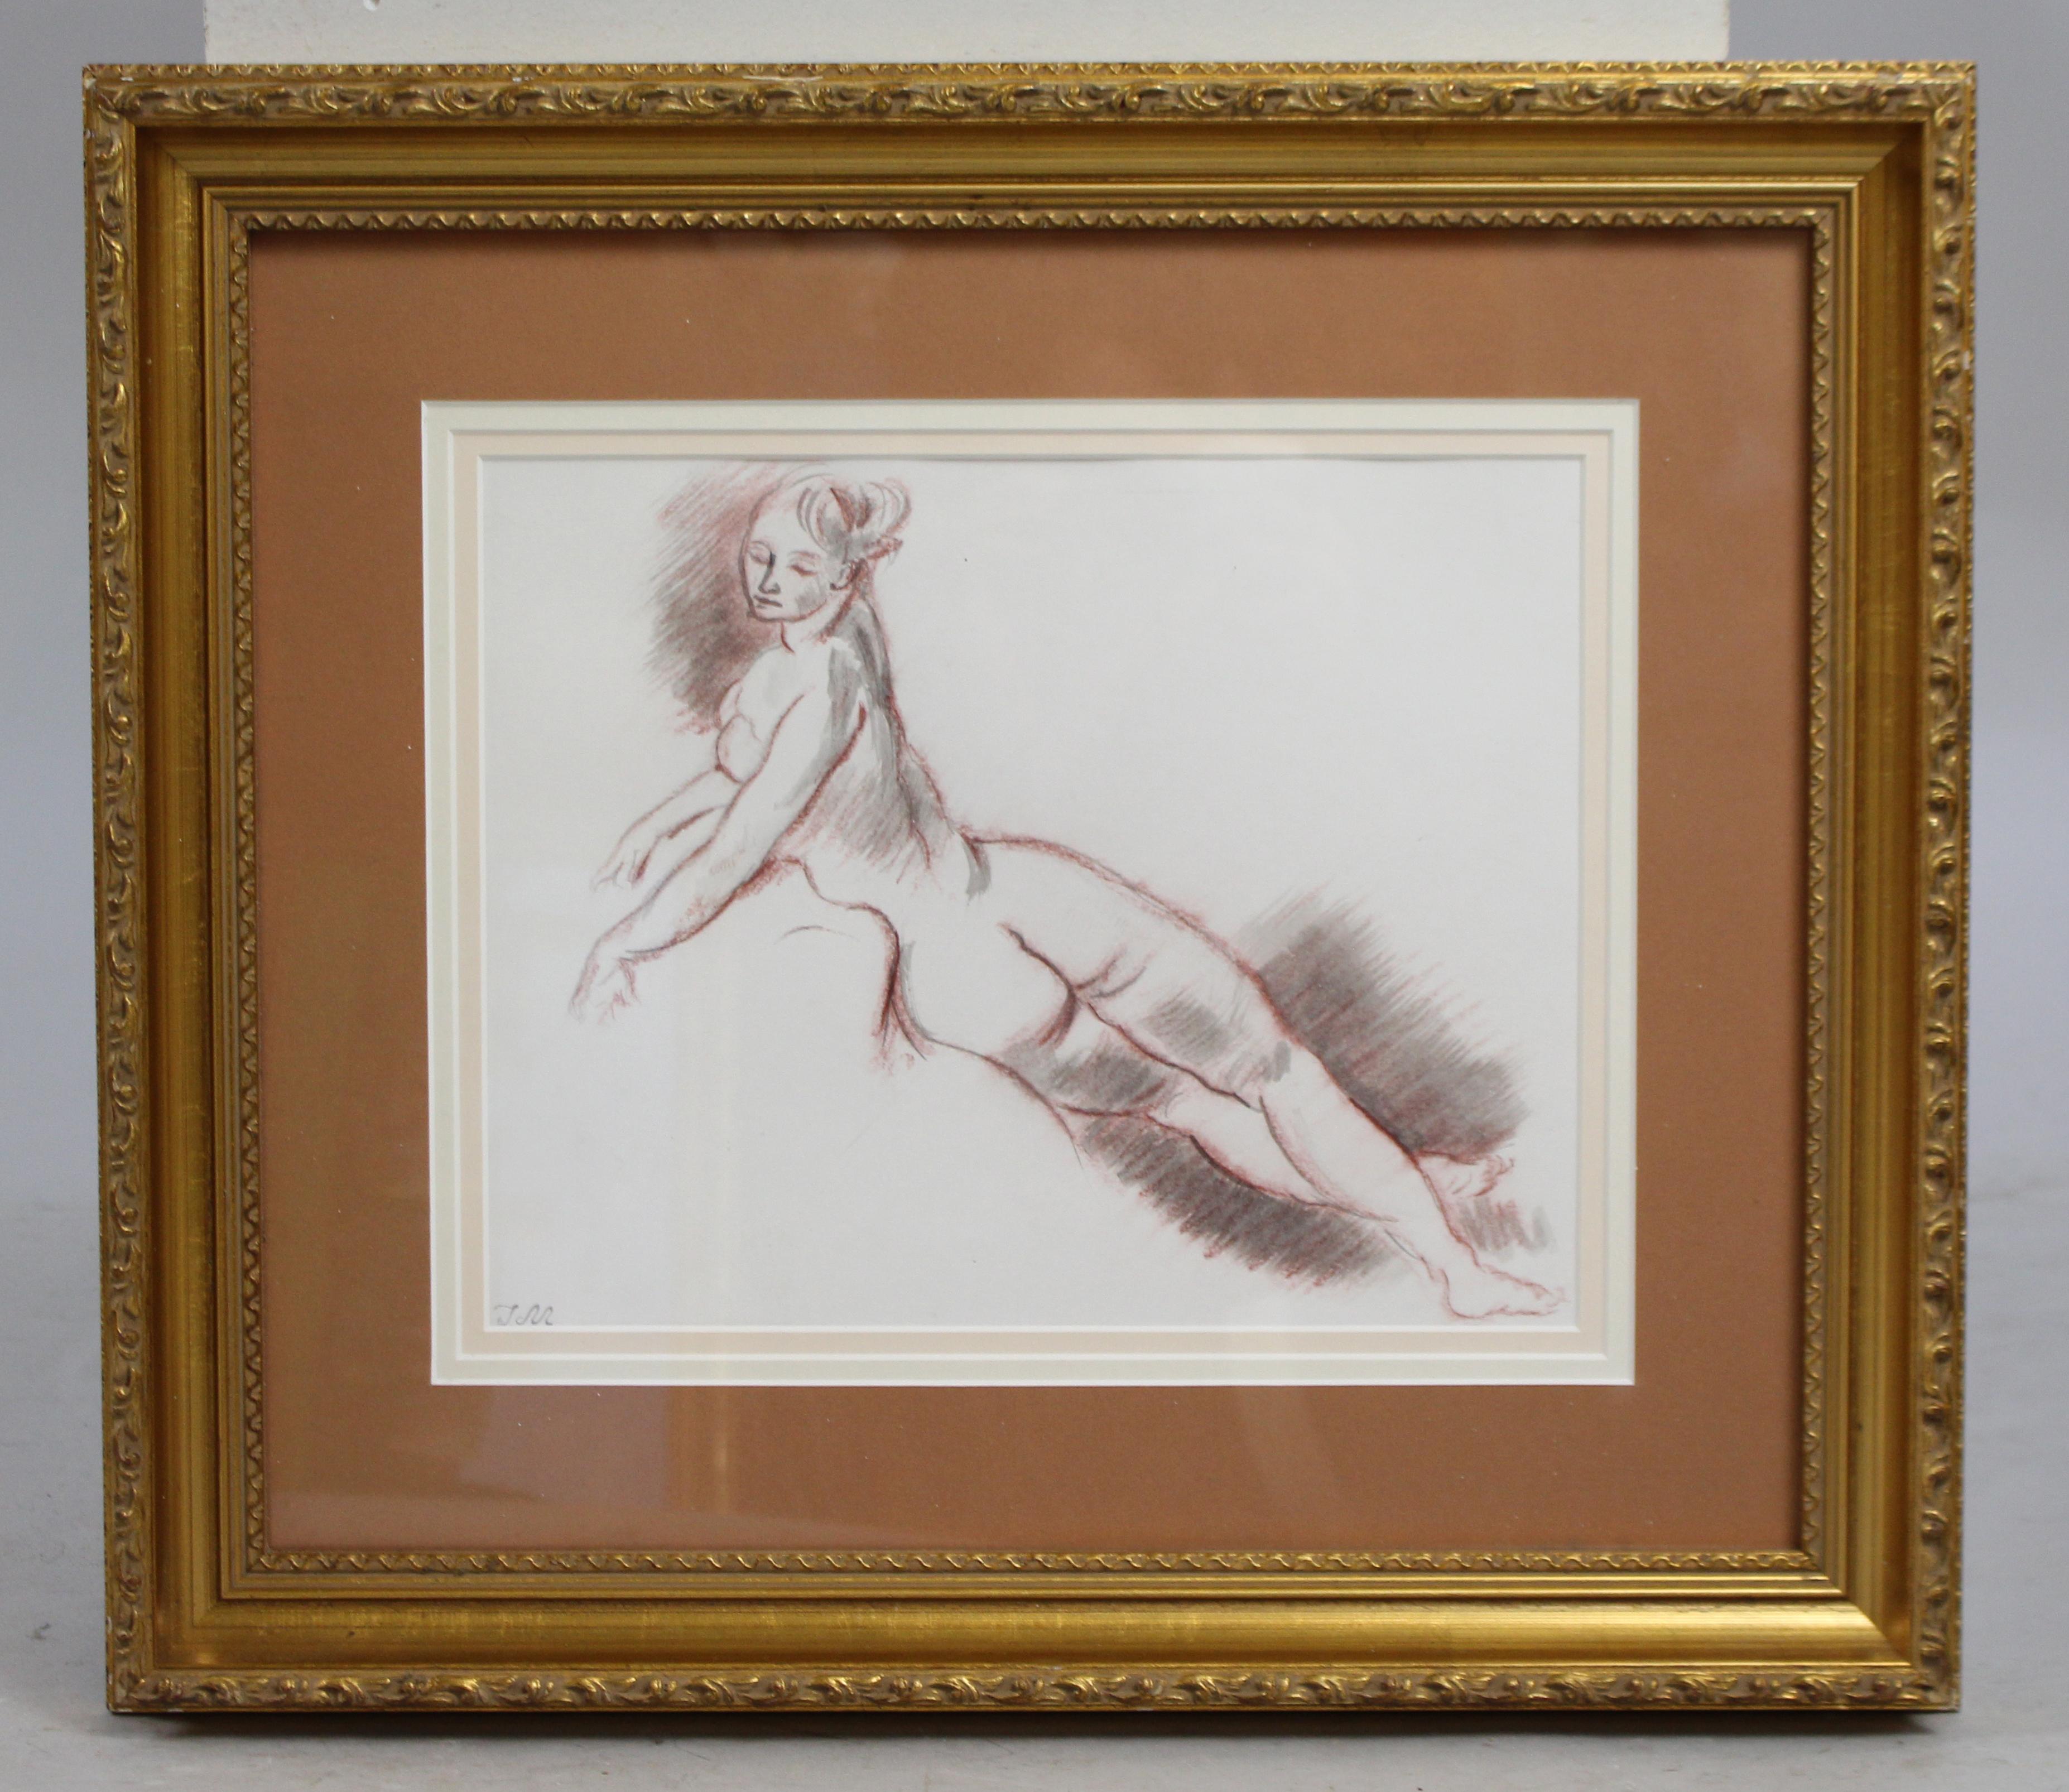 French ink & conte nude sketch set in gilt frame


Delicate nude. 

Monogrammed signature TM. 

Ink & gouache. 

Triple mounted & set behind glass in gilt frame. 

Frame measures 46 x 40 cm. 

Offered in good condition, ready to hang.